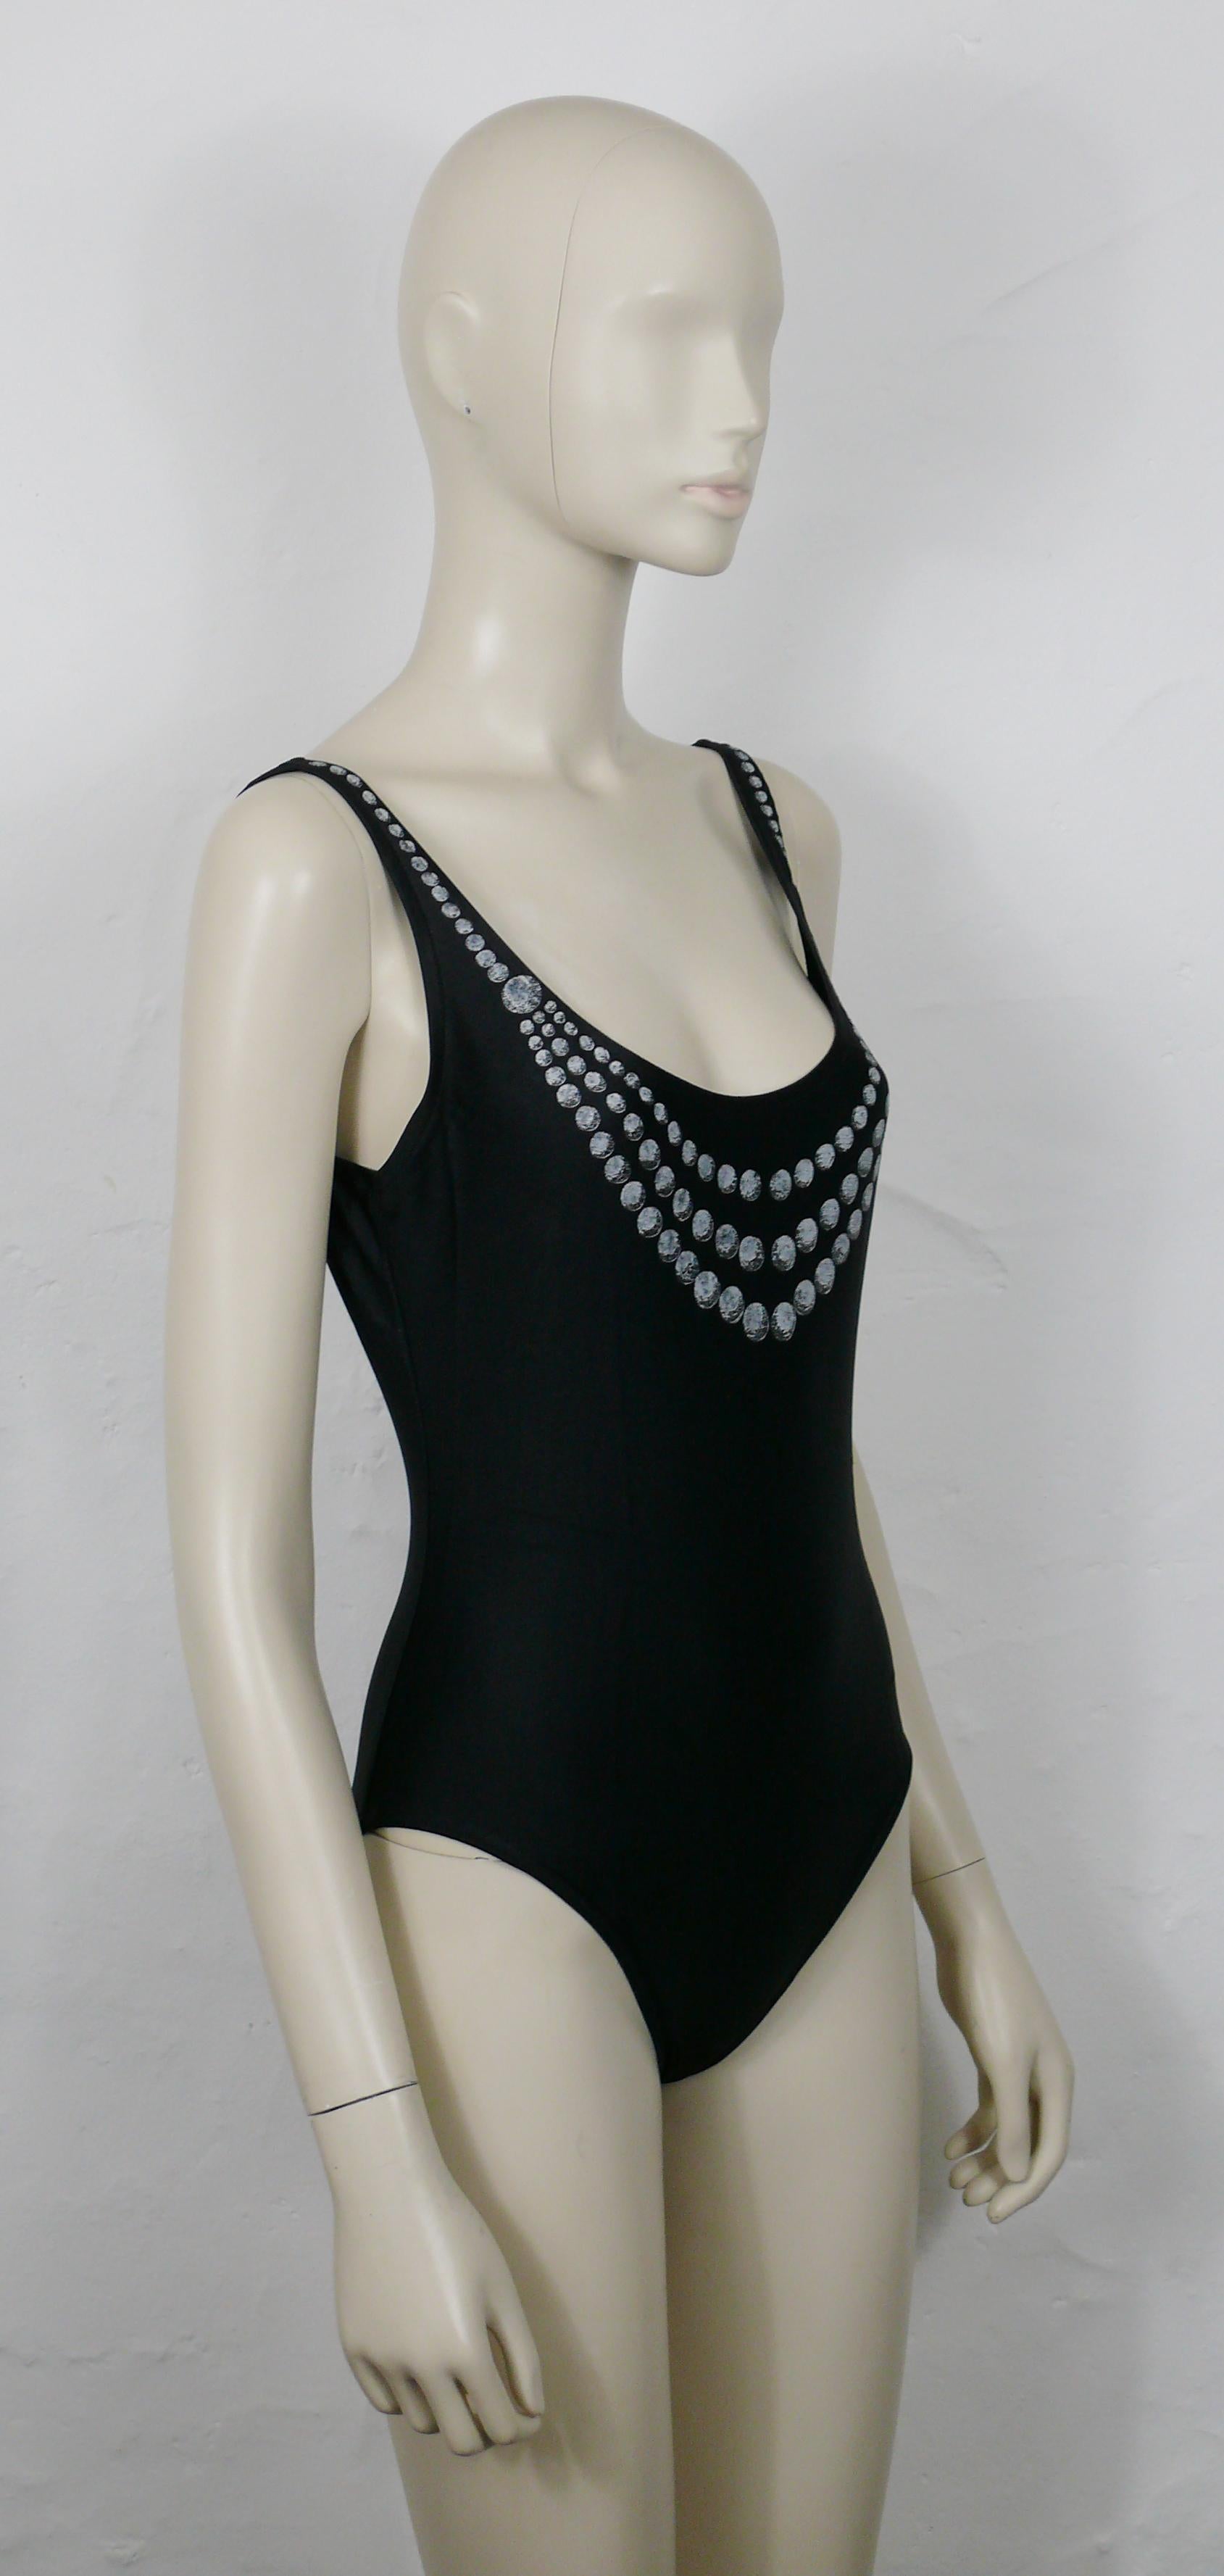 CHANEL by KARL LAGERFELD vintage black one-piece swimsuit featuring a printed pearl necklace trompe l'oeil.

Spring/Summer 1997 Ready-to-Wear Collection.

Label reads CHANEL.
Made in France.

Size tag reads : 42.
Please refer to measurements.